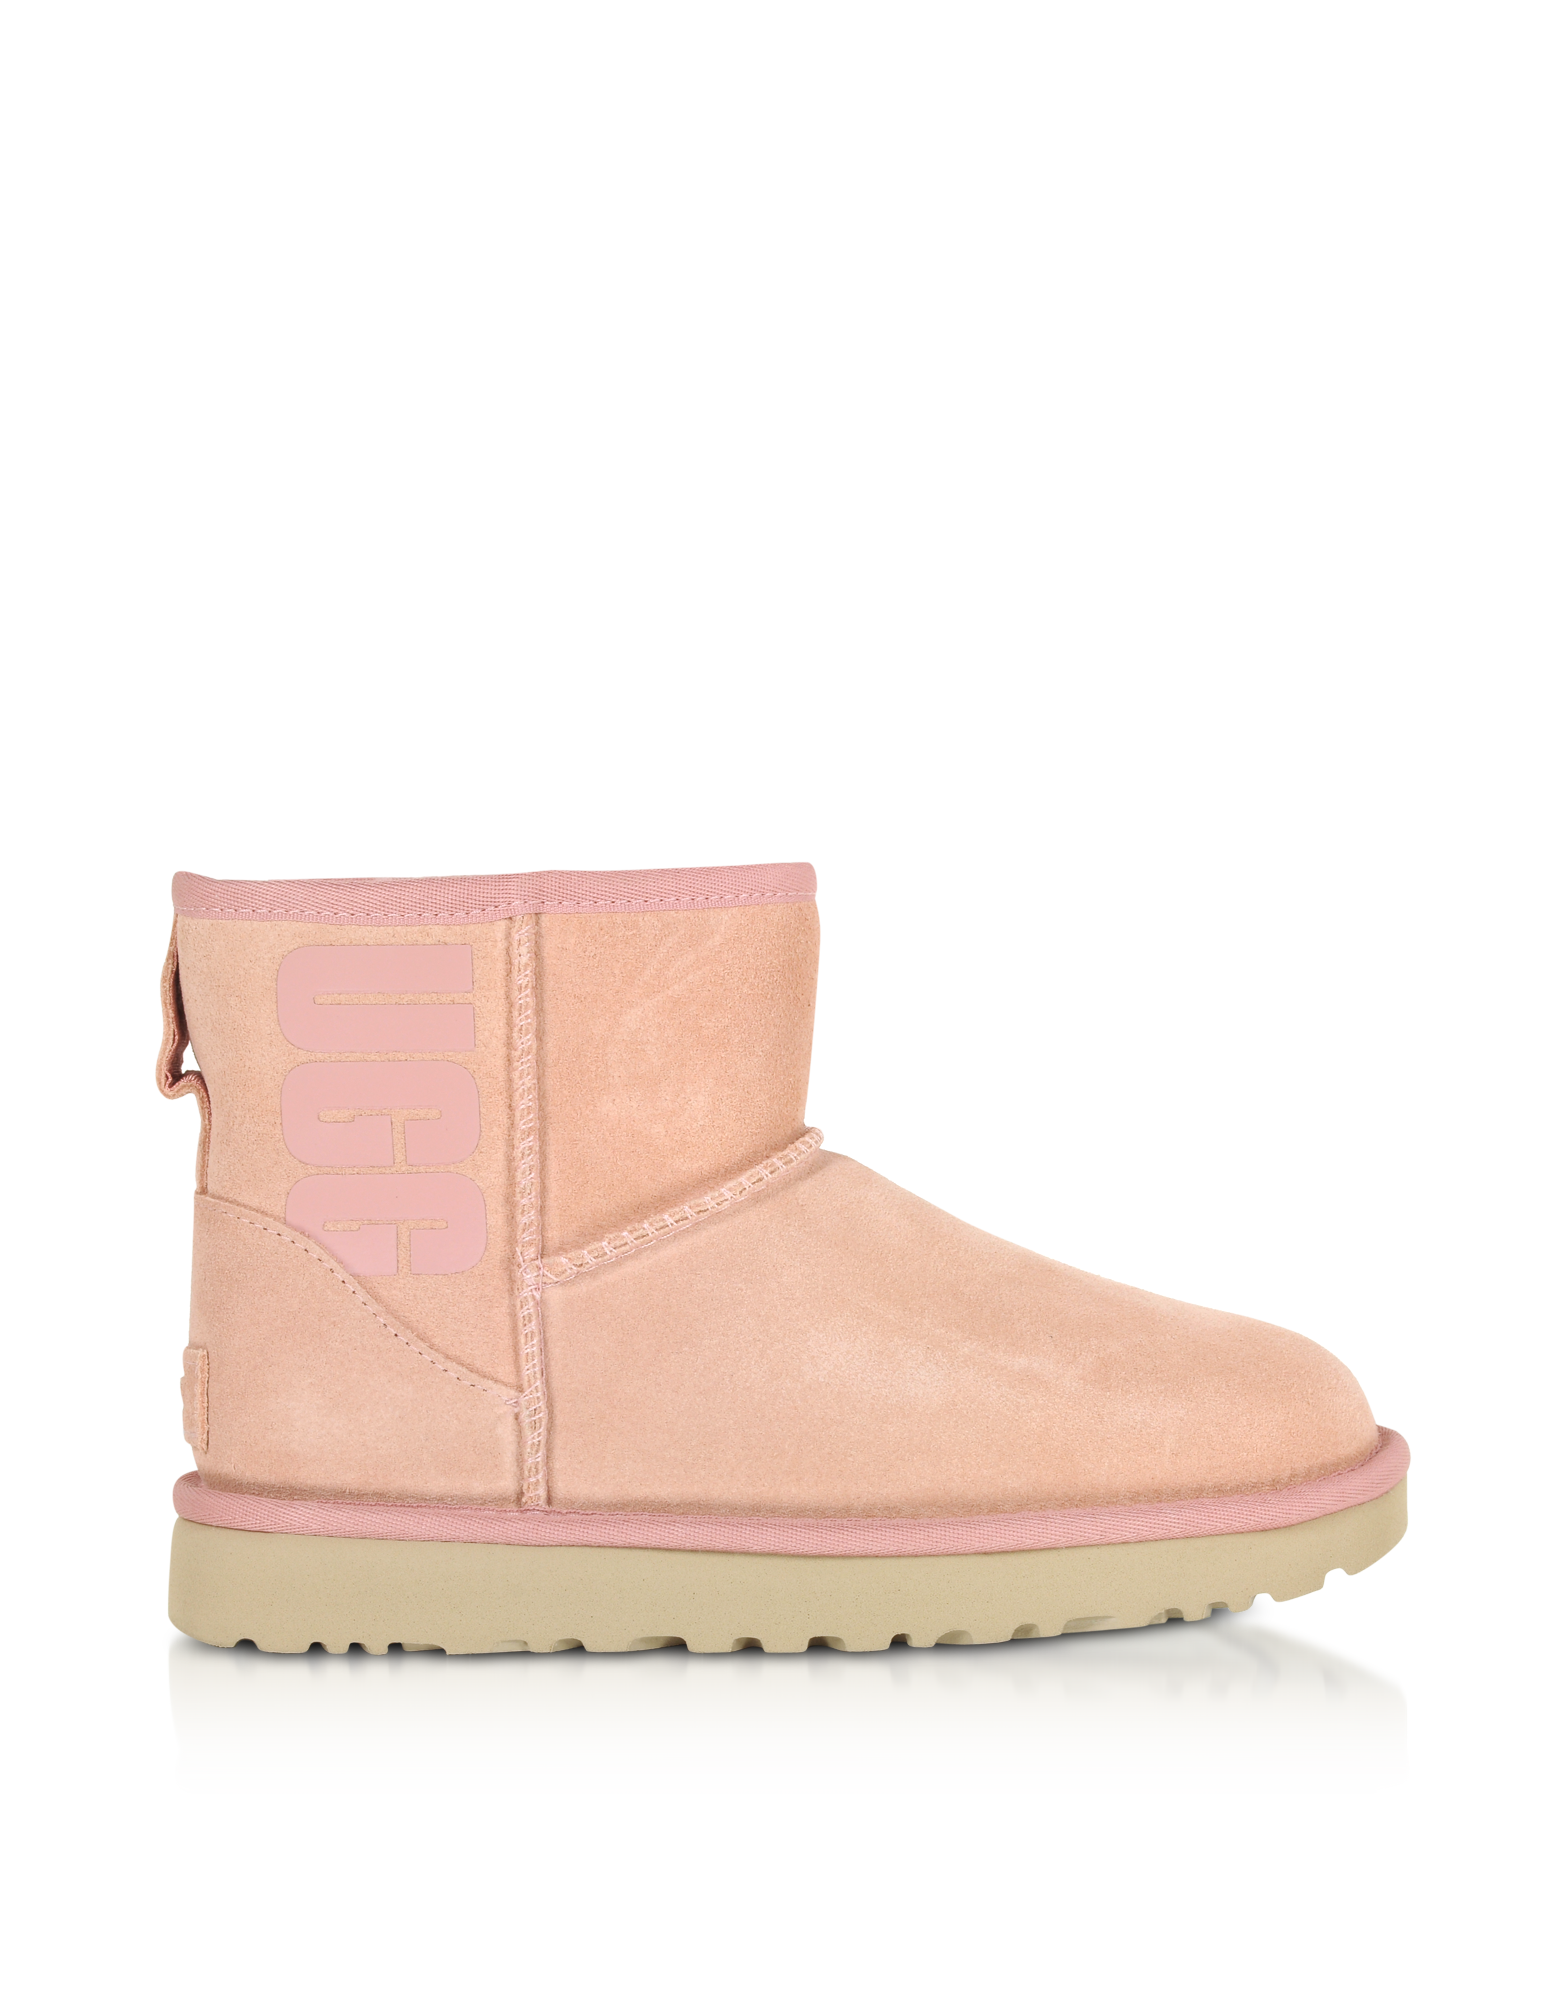 rosa ugg boots Cheaper Than Retail 